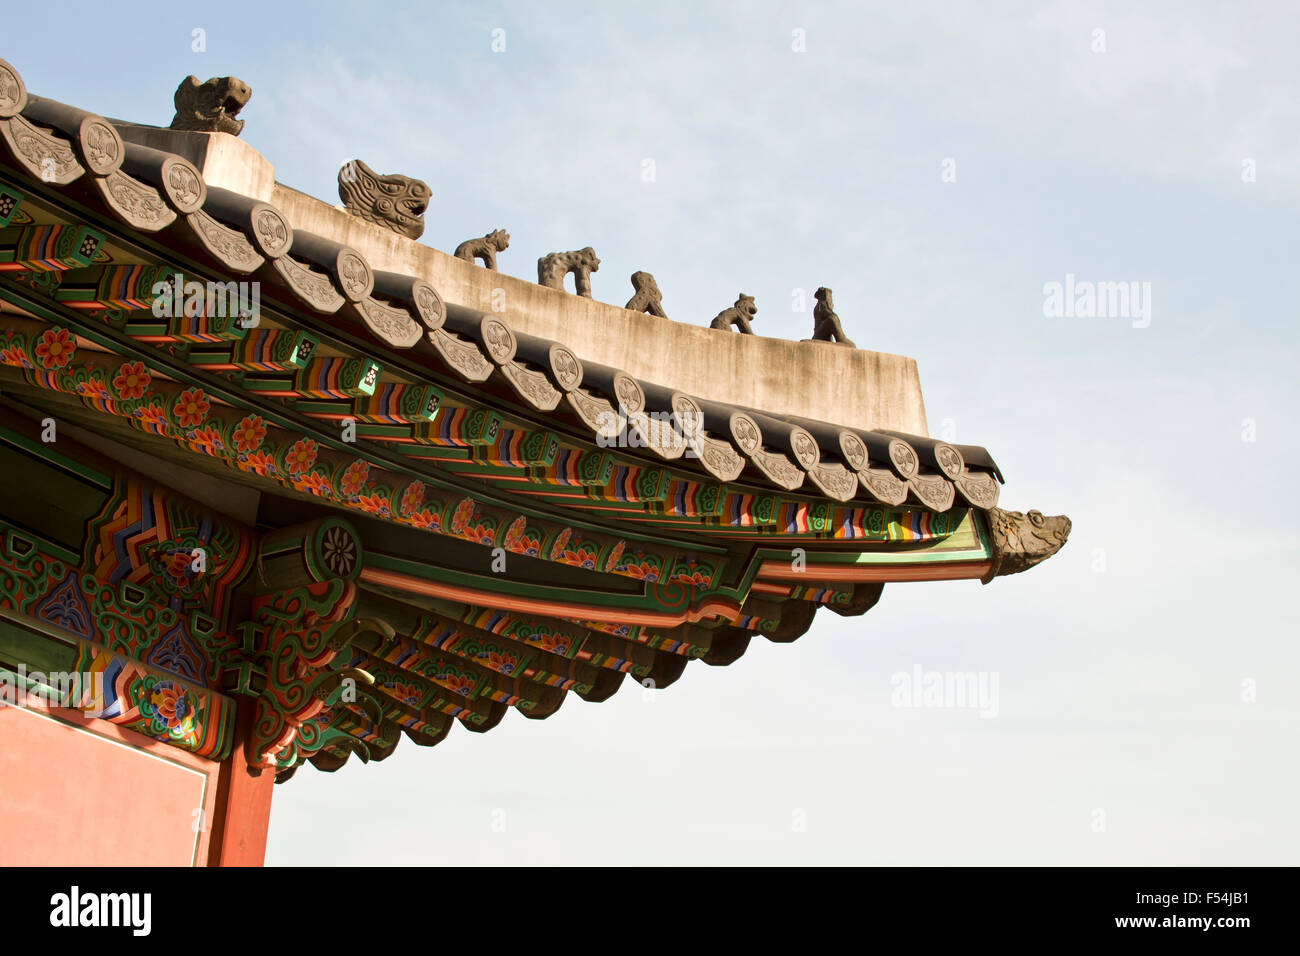 Seoul, Korean traditional architecture, sky, asian roof Stock Photo